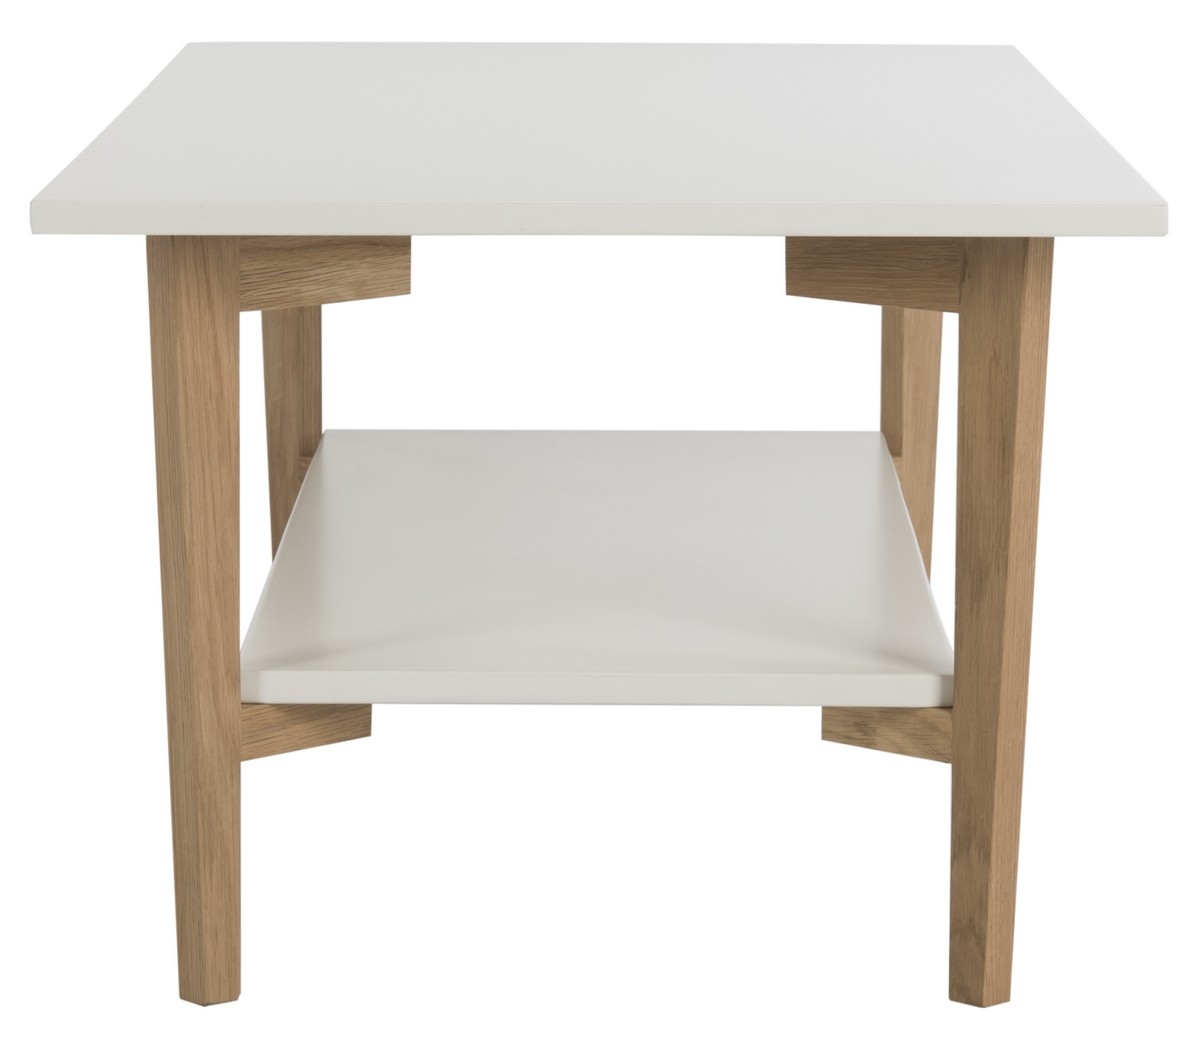 Caraway Rect Coffee Table - White - Arlo Home - Image 3